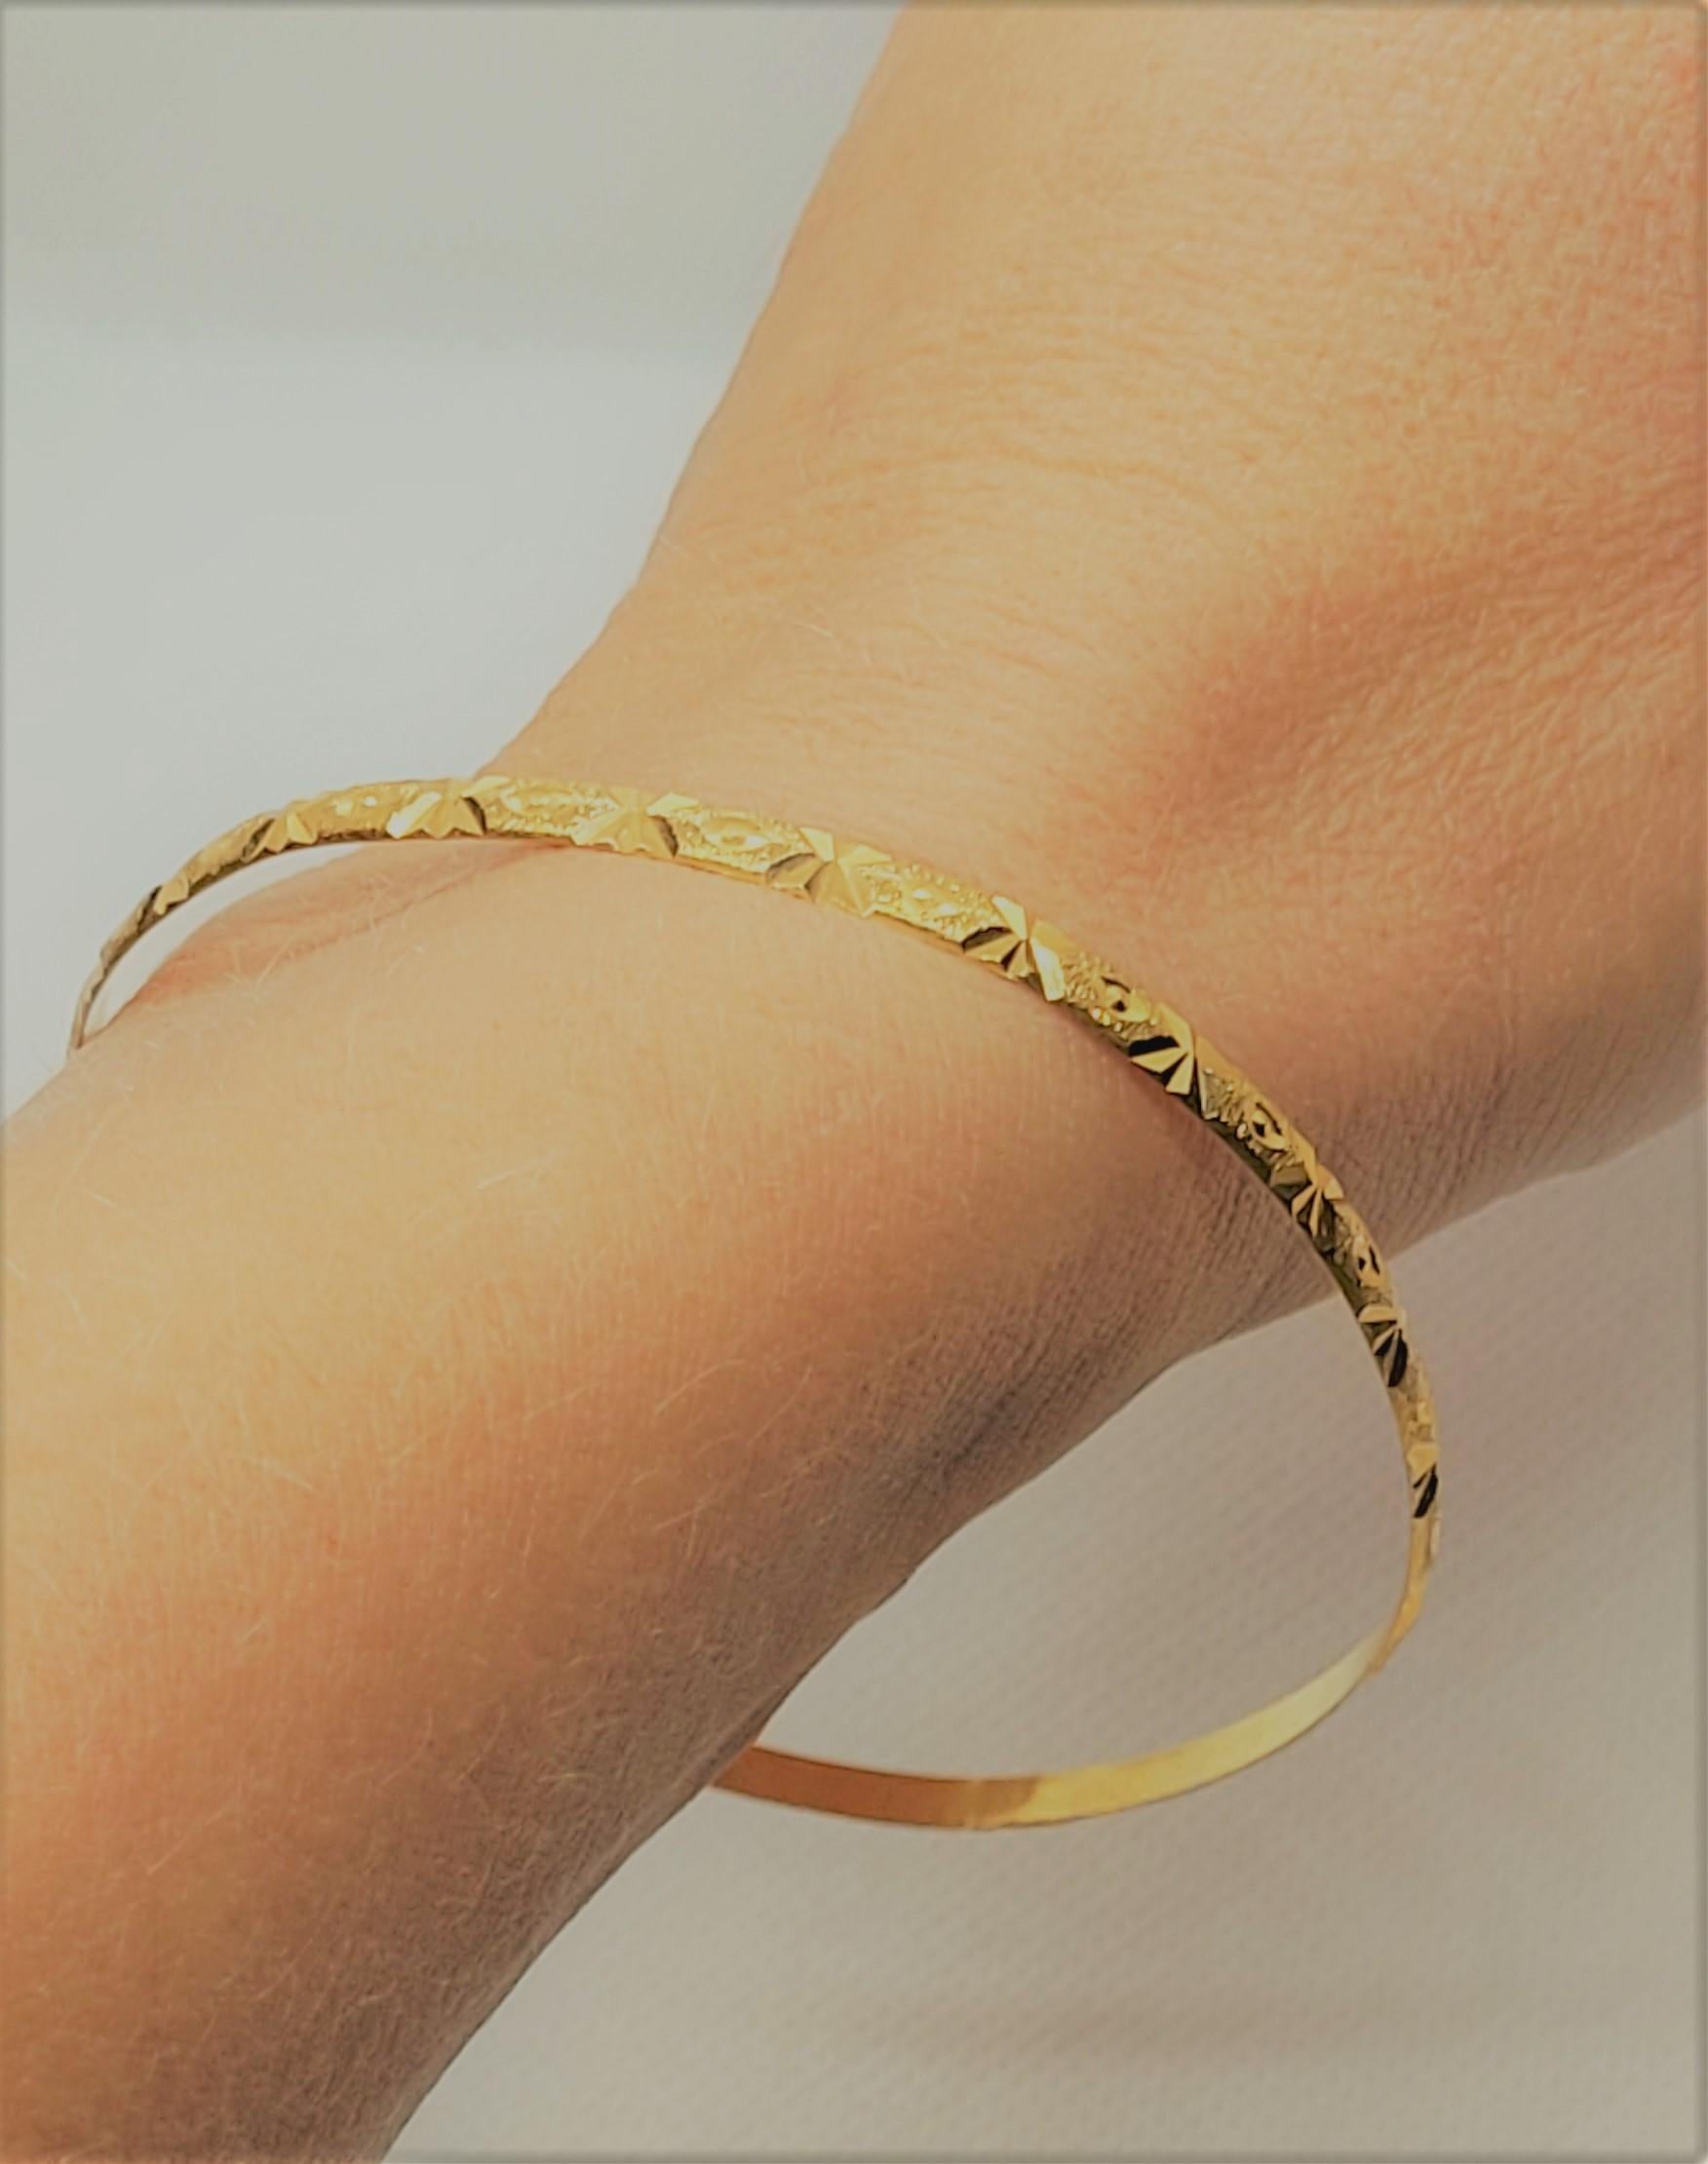 Beautiful 21kt gold bangle bracelet that weighs 9.51 grams. The bracelet has a lovely diamond-cut design, is 3.2 mm wide, 1.2 mm thick and the diameter is approximately 68mm. The inside of the bangle is stamped AS21K. Overall, the bracelet is in